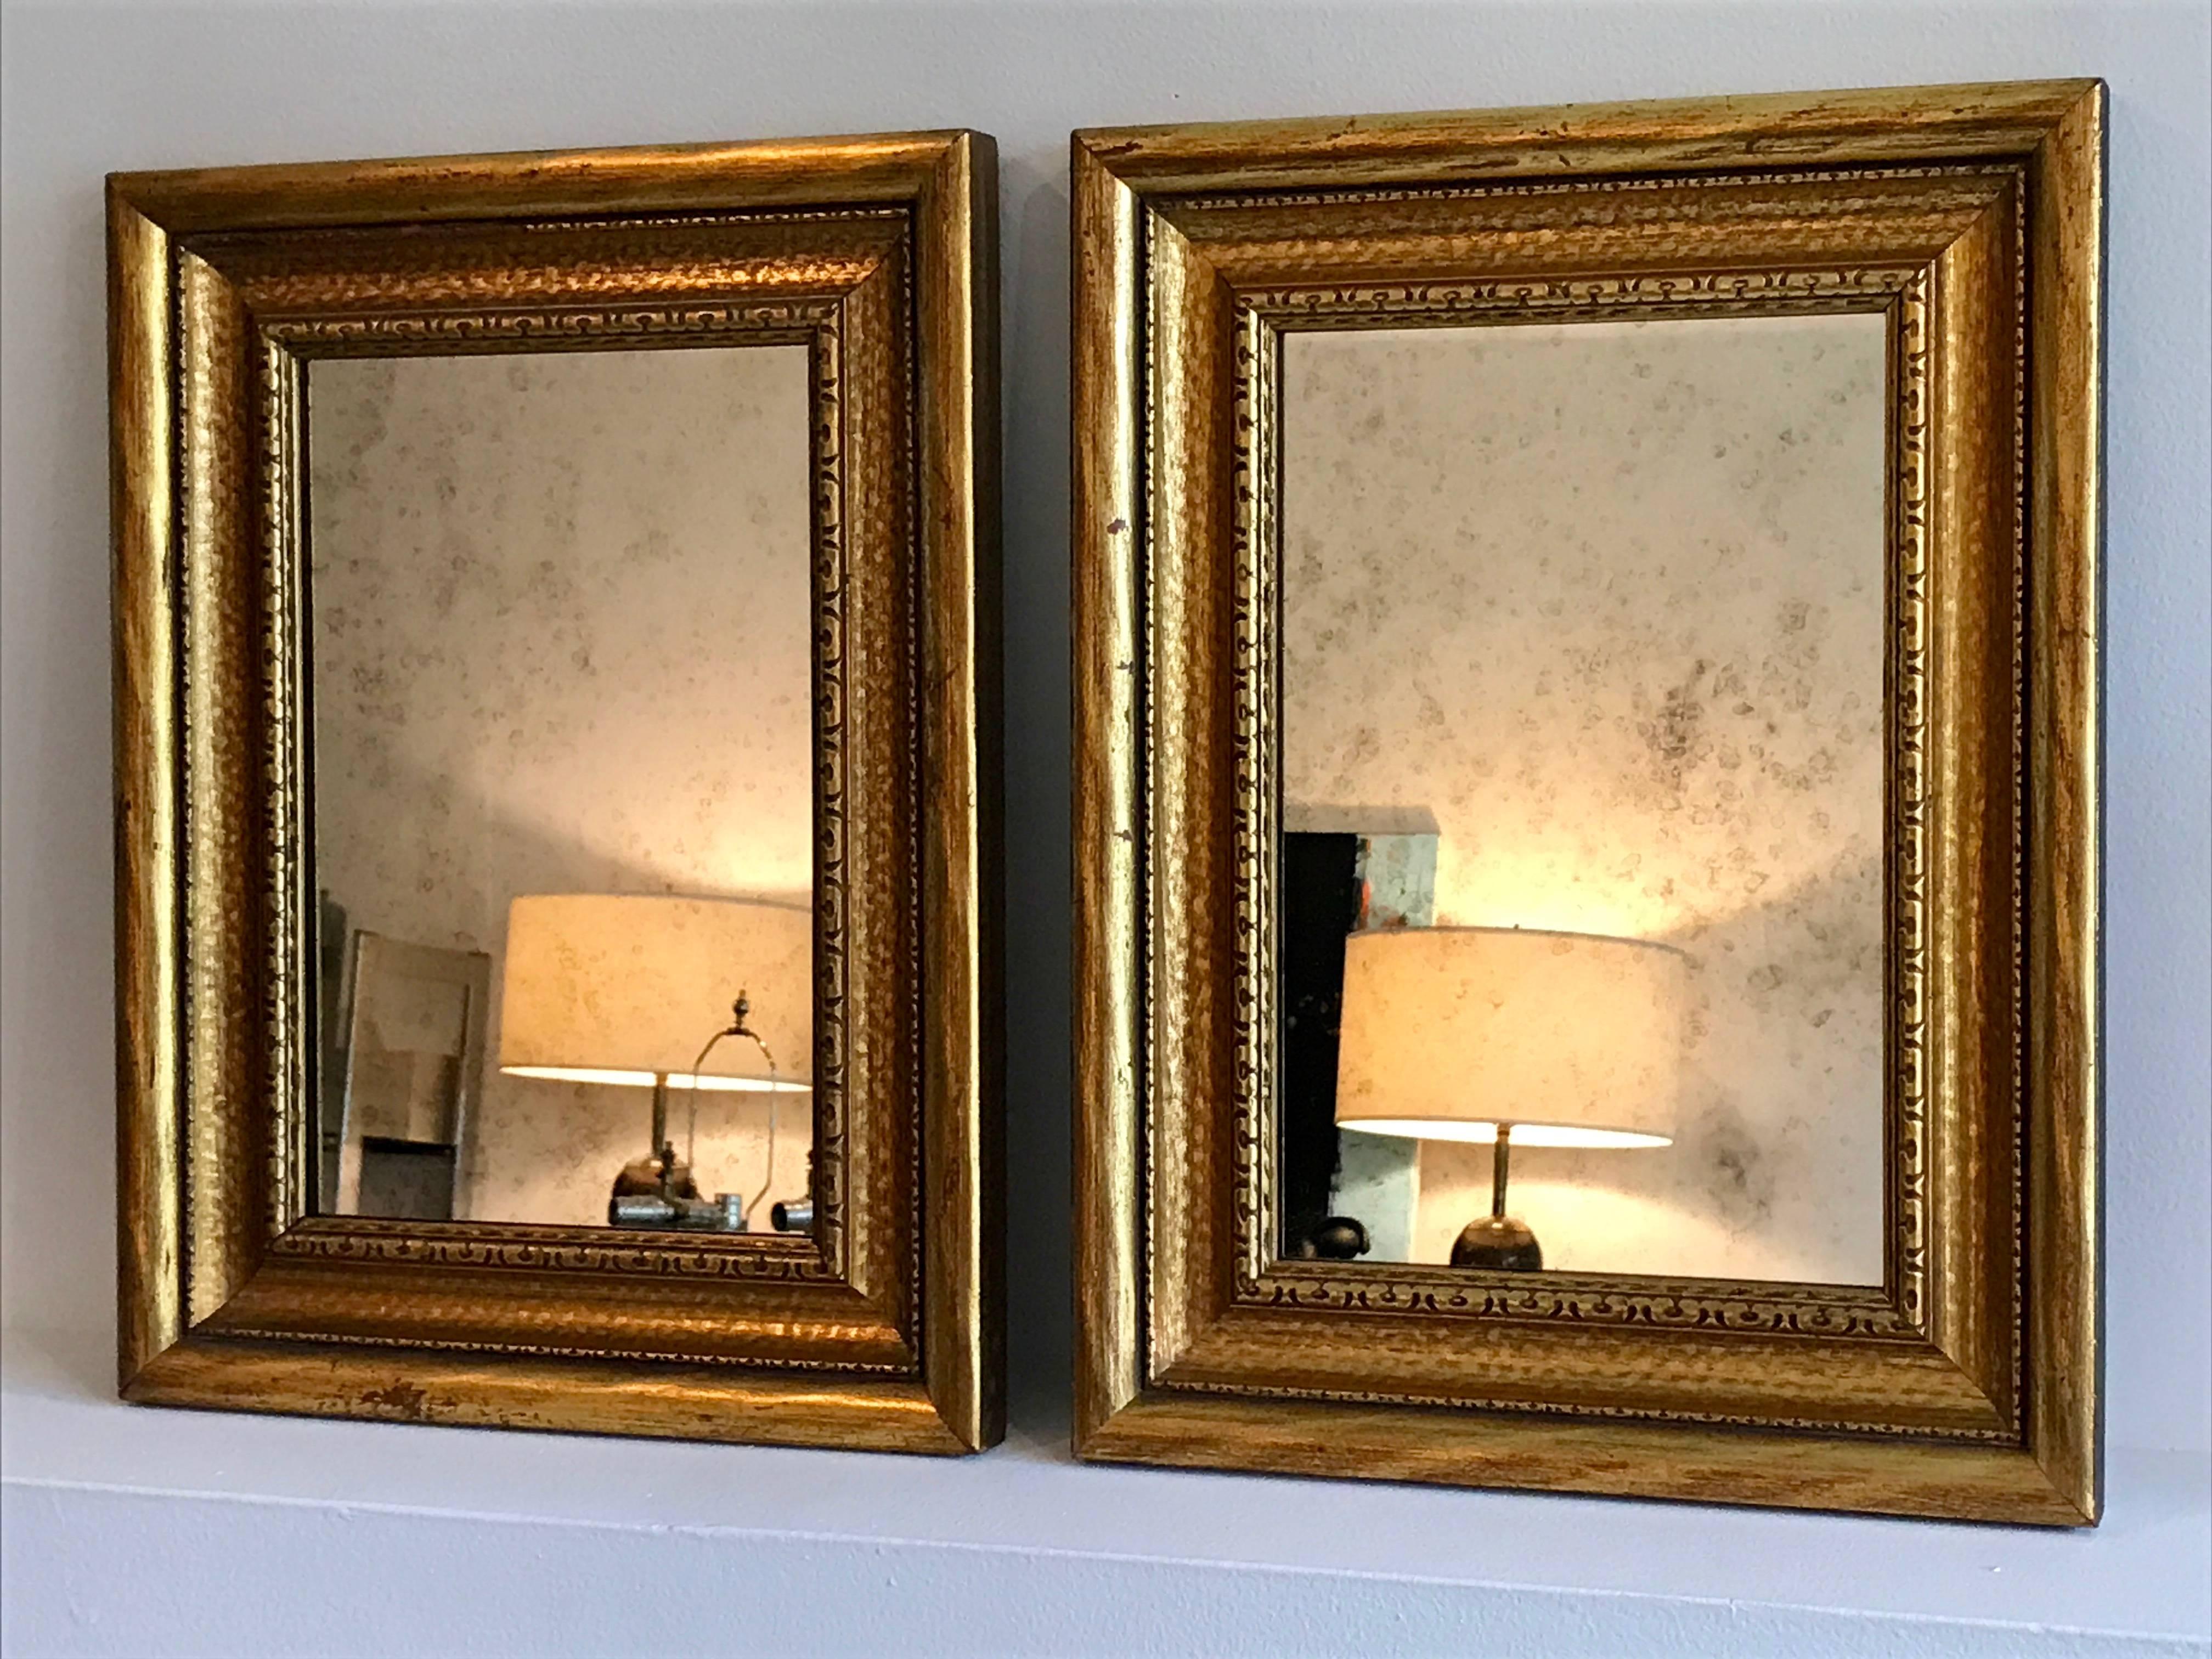 Gorgeous pair of gilt-wood Frames with silver antiqued mirror. Can be mounted vertically or horizontally. Please see photos to see the beautifully aged mirrors. 